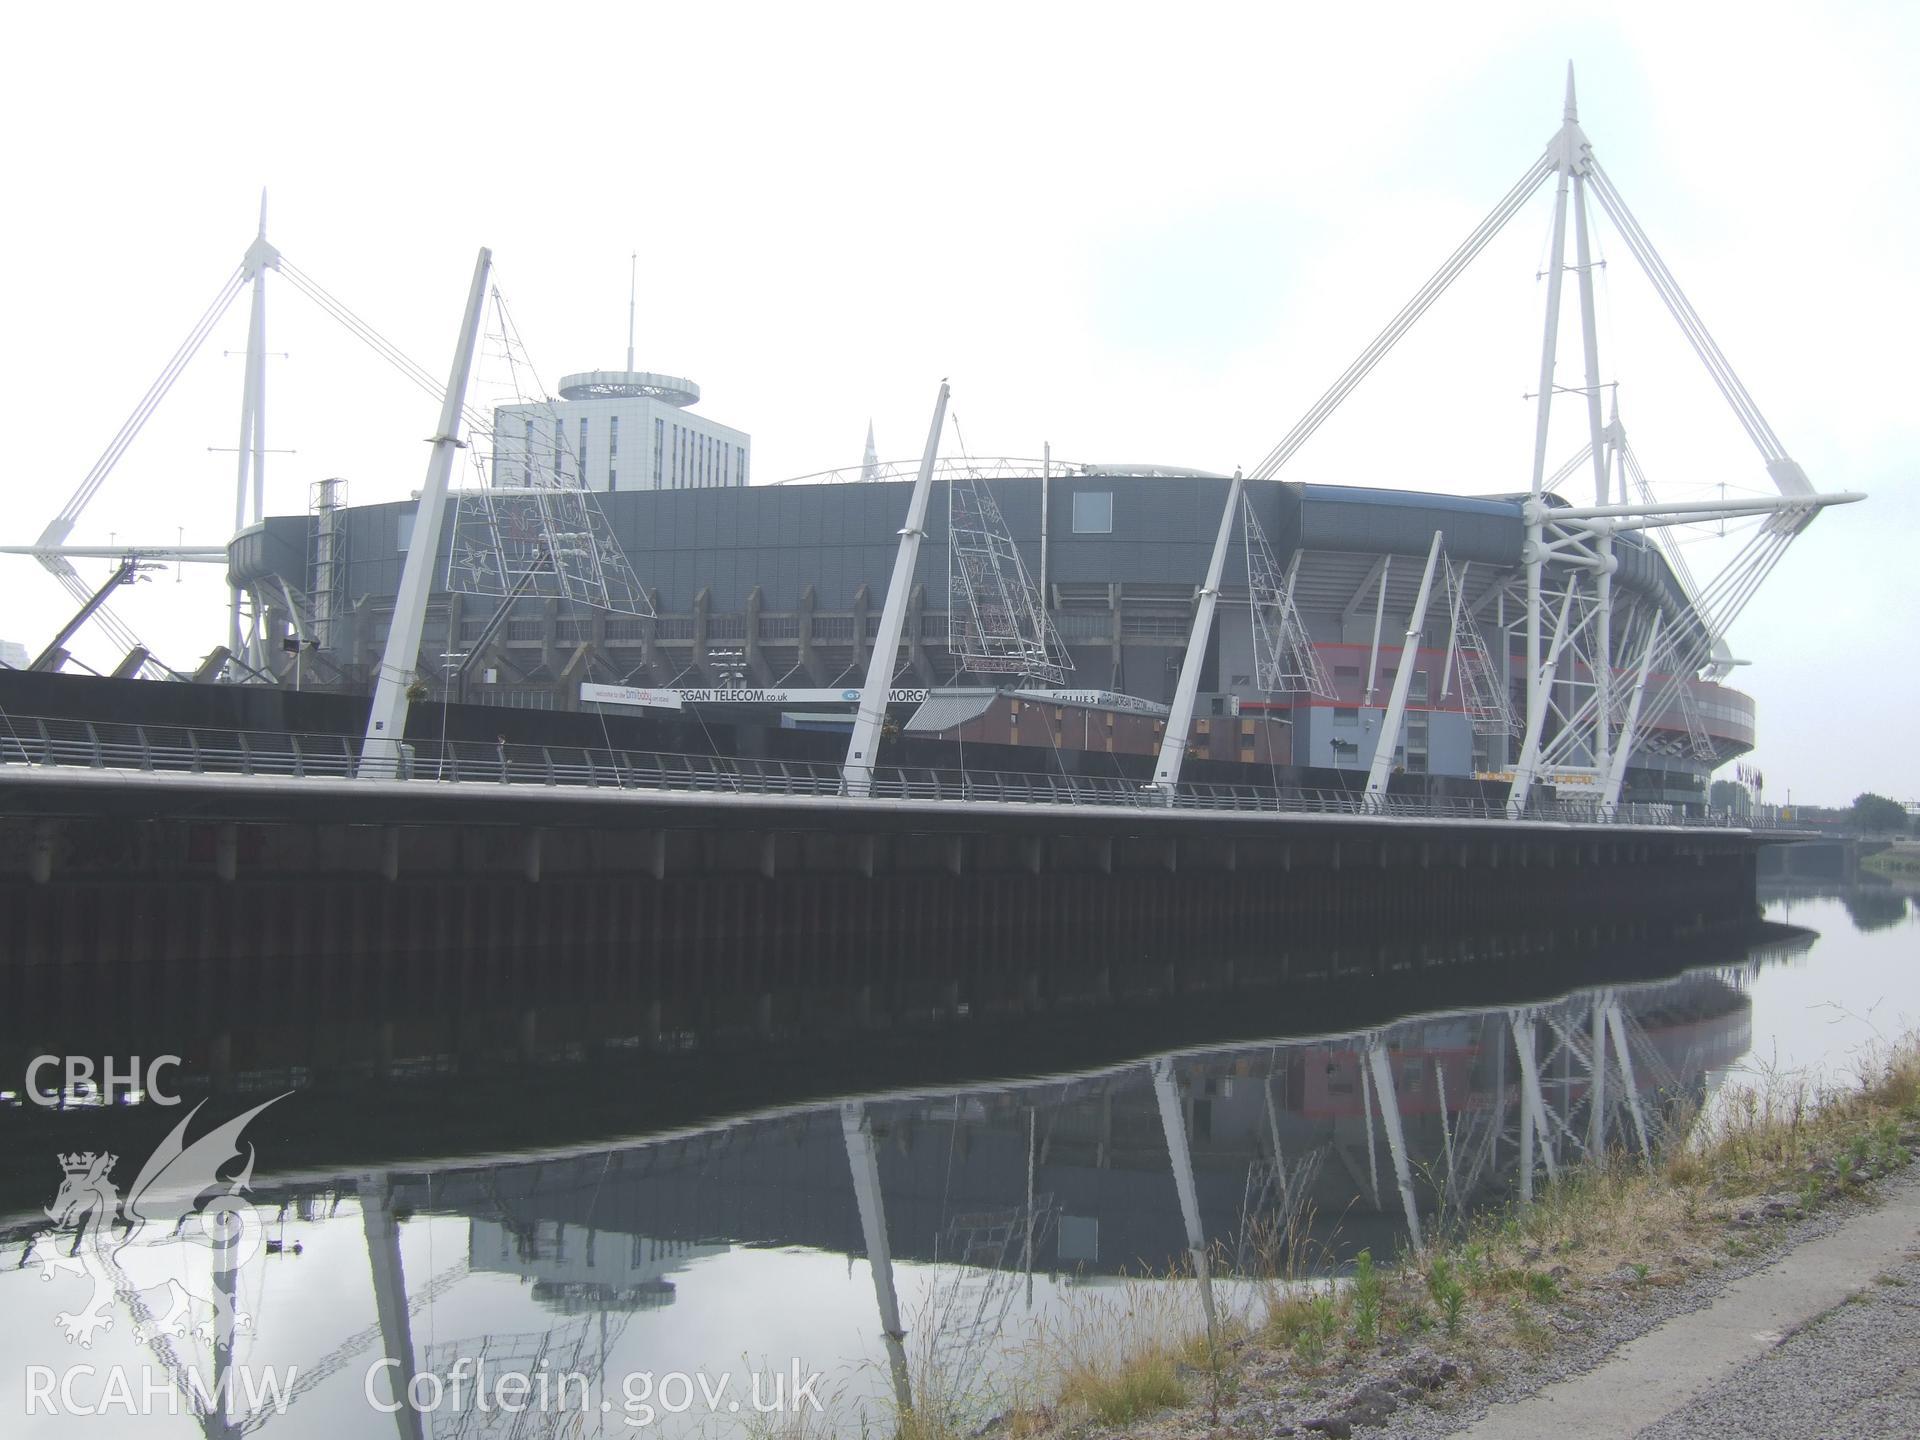 North-west corner of the stadium and riverside walkway from across the river.